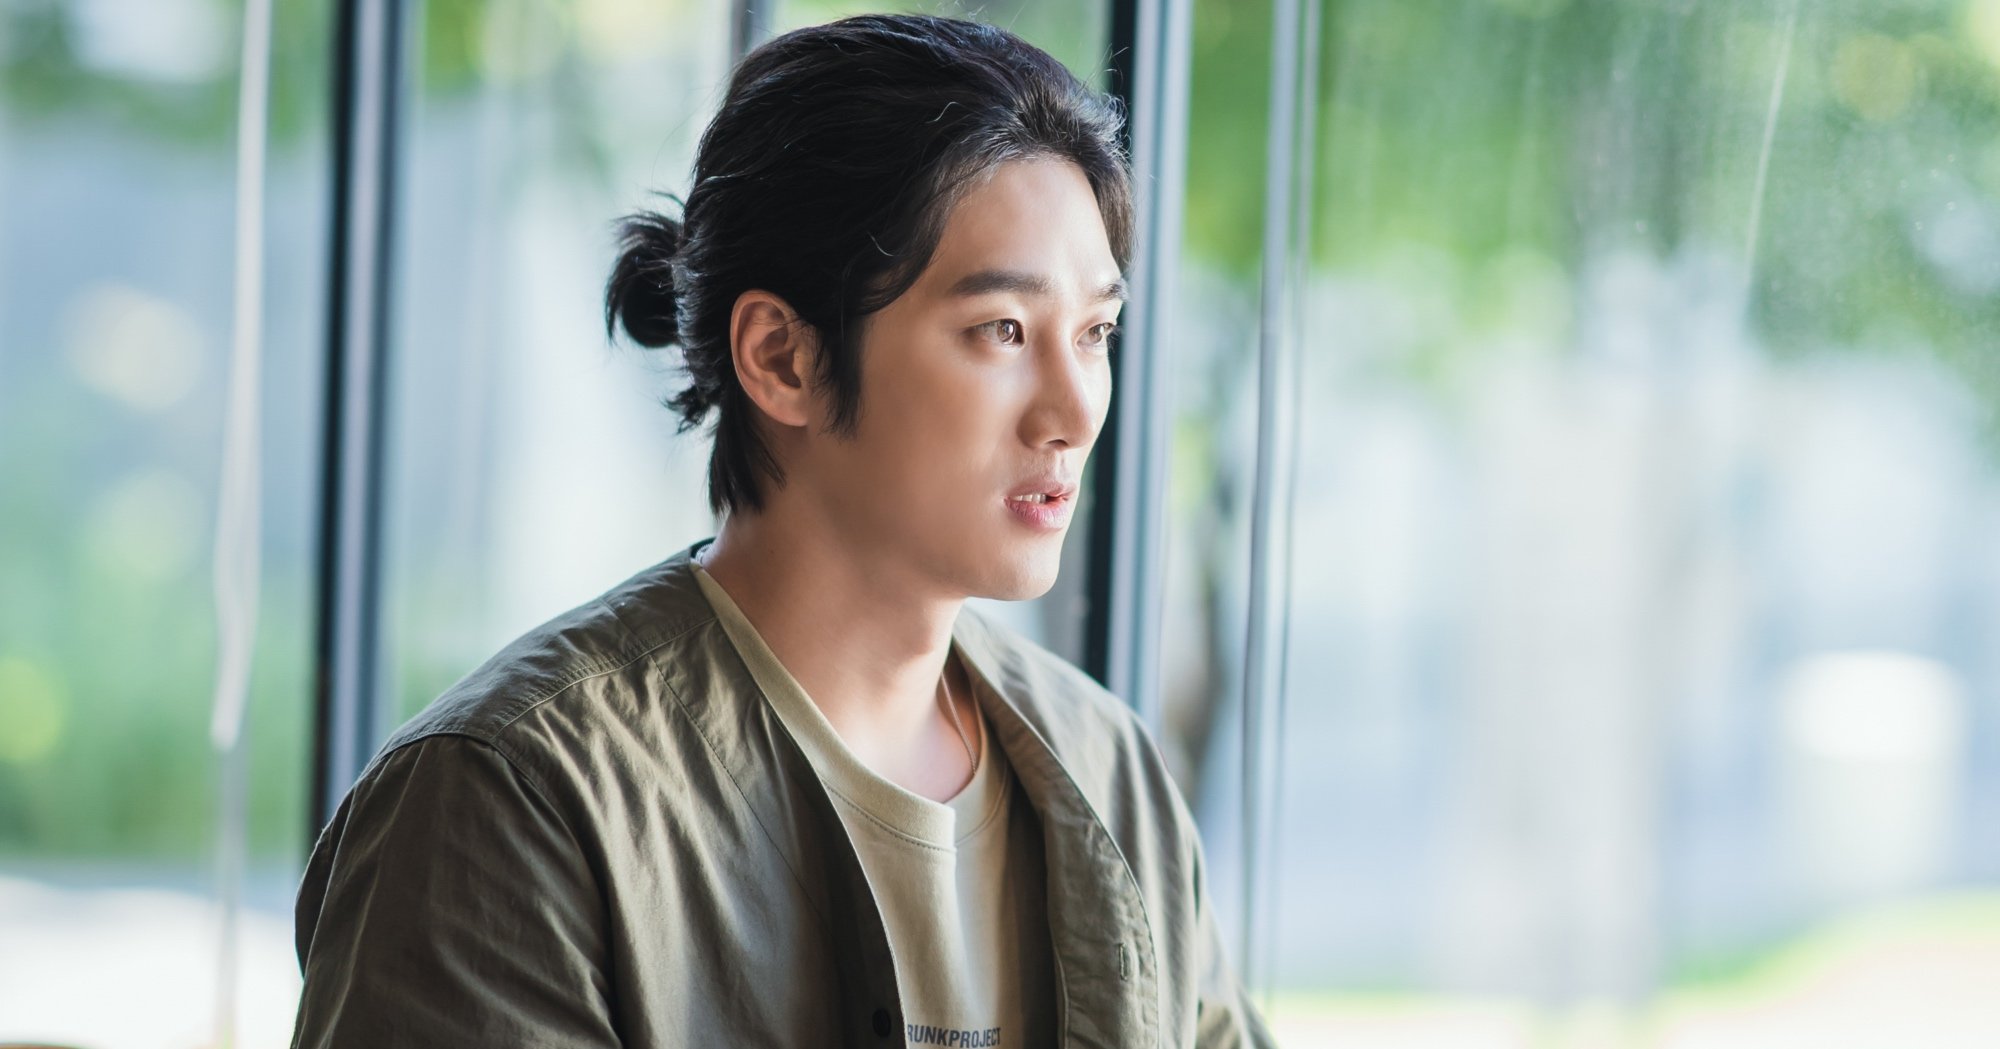 Character Goo Woong from 'Yumi's Cells' Episode 14 breakup wearing green shirt and tied up hair.